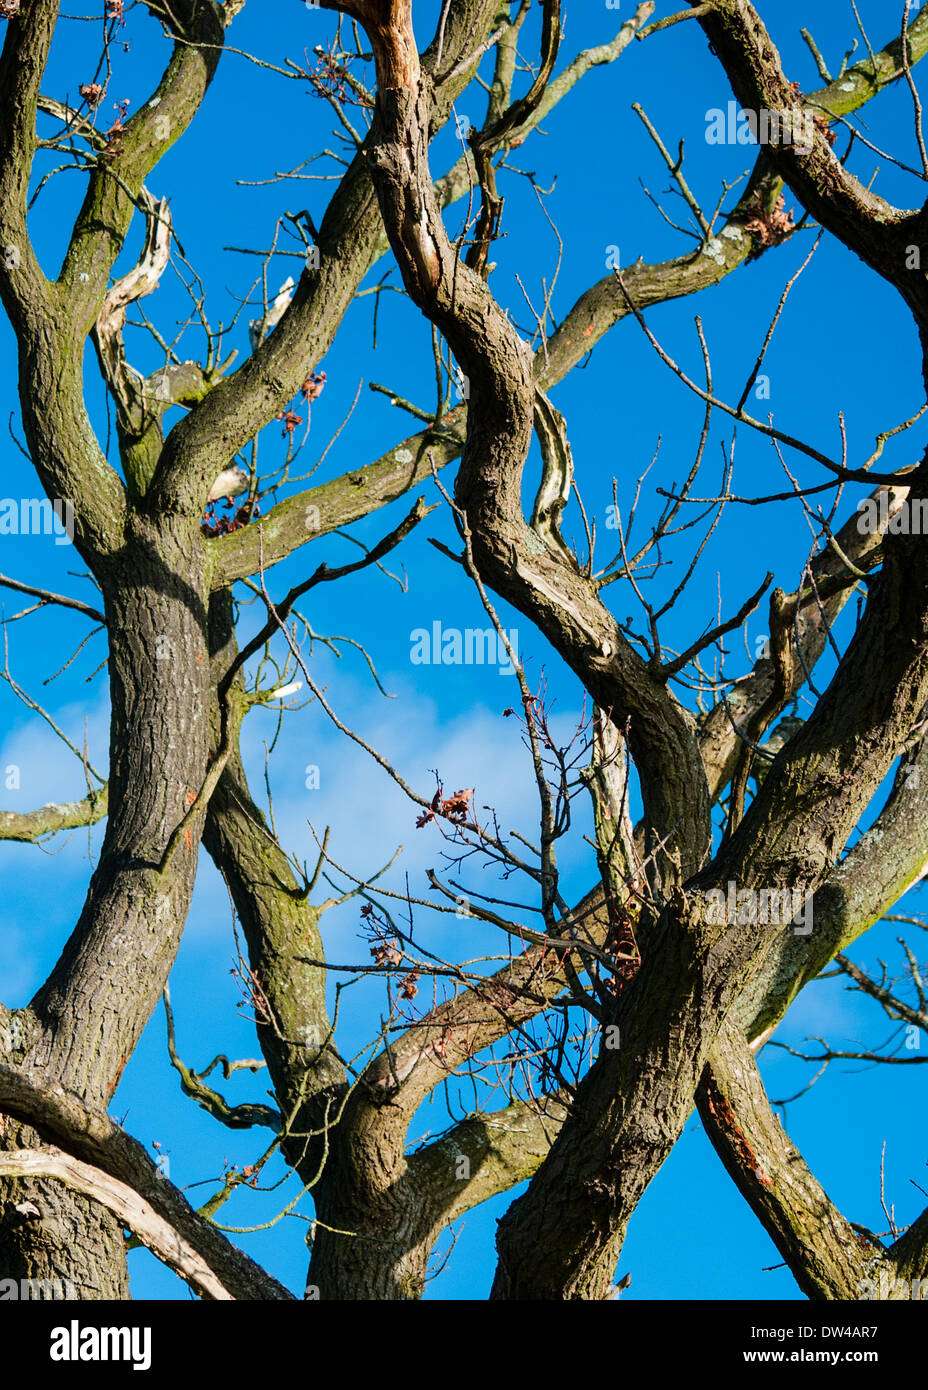 Gnarled tree branches against blue sky with white cloud. Stock Photo